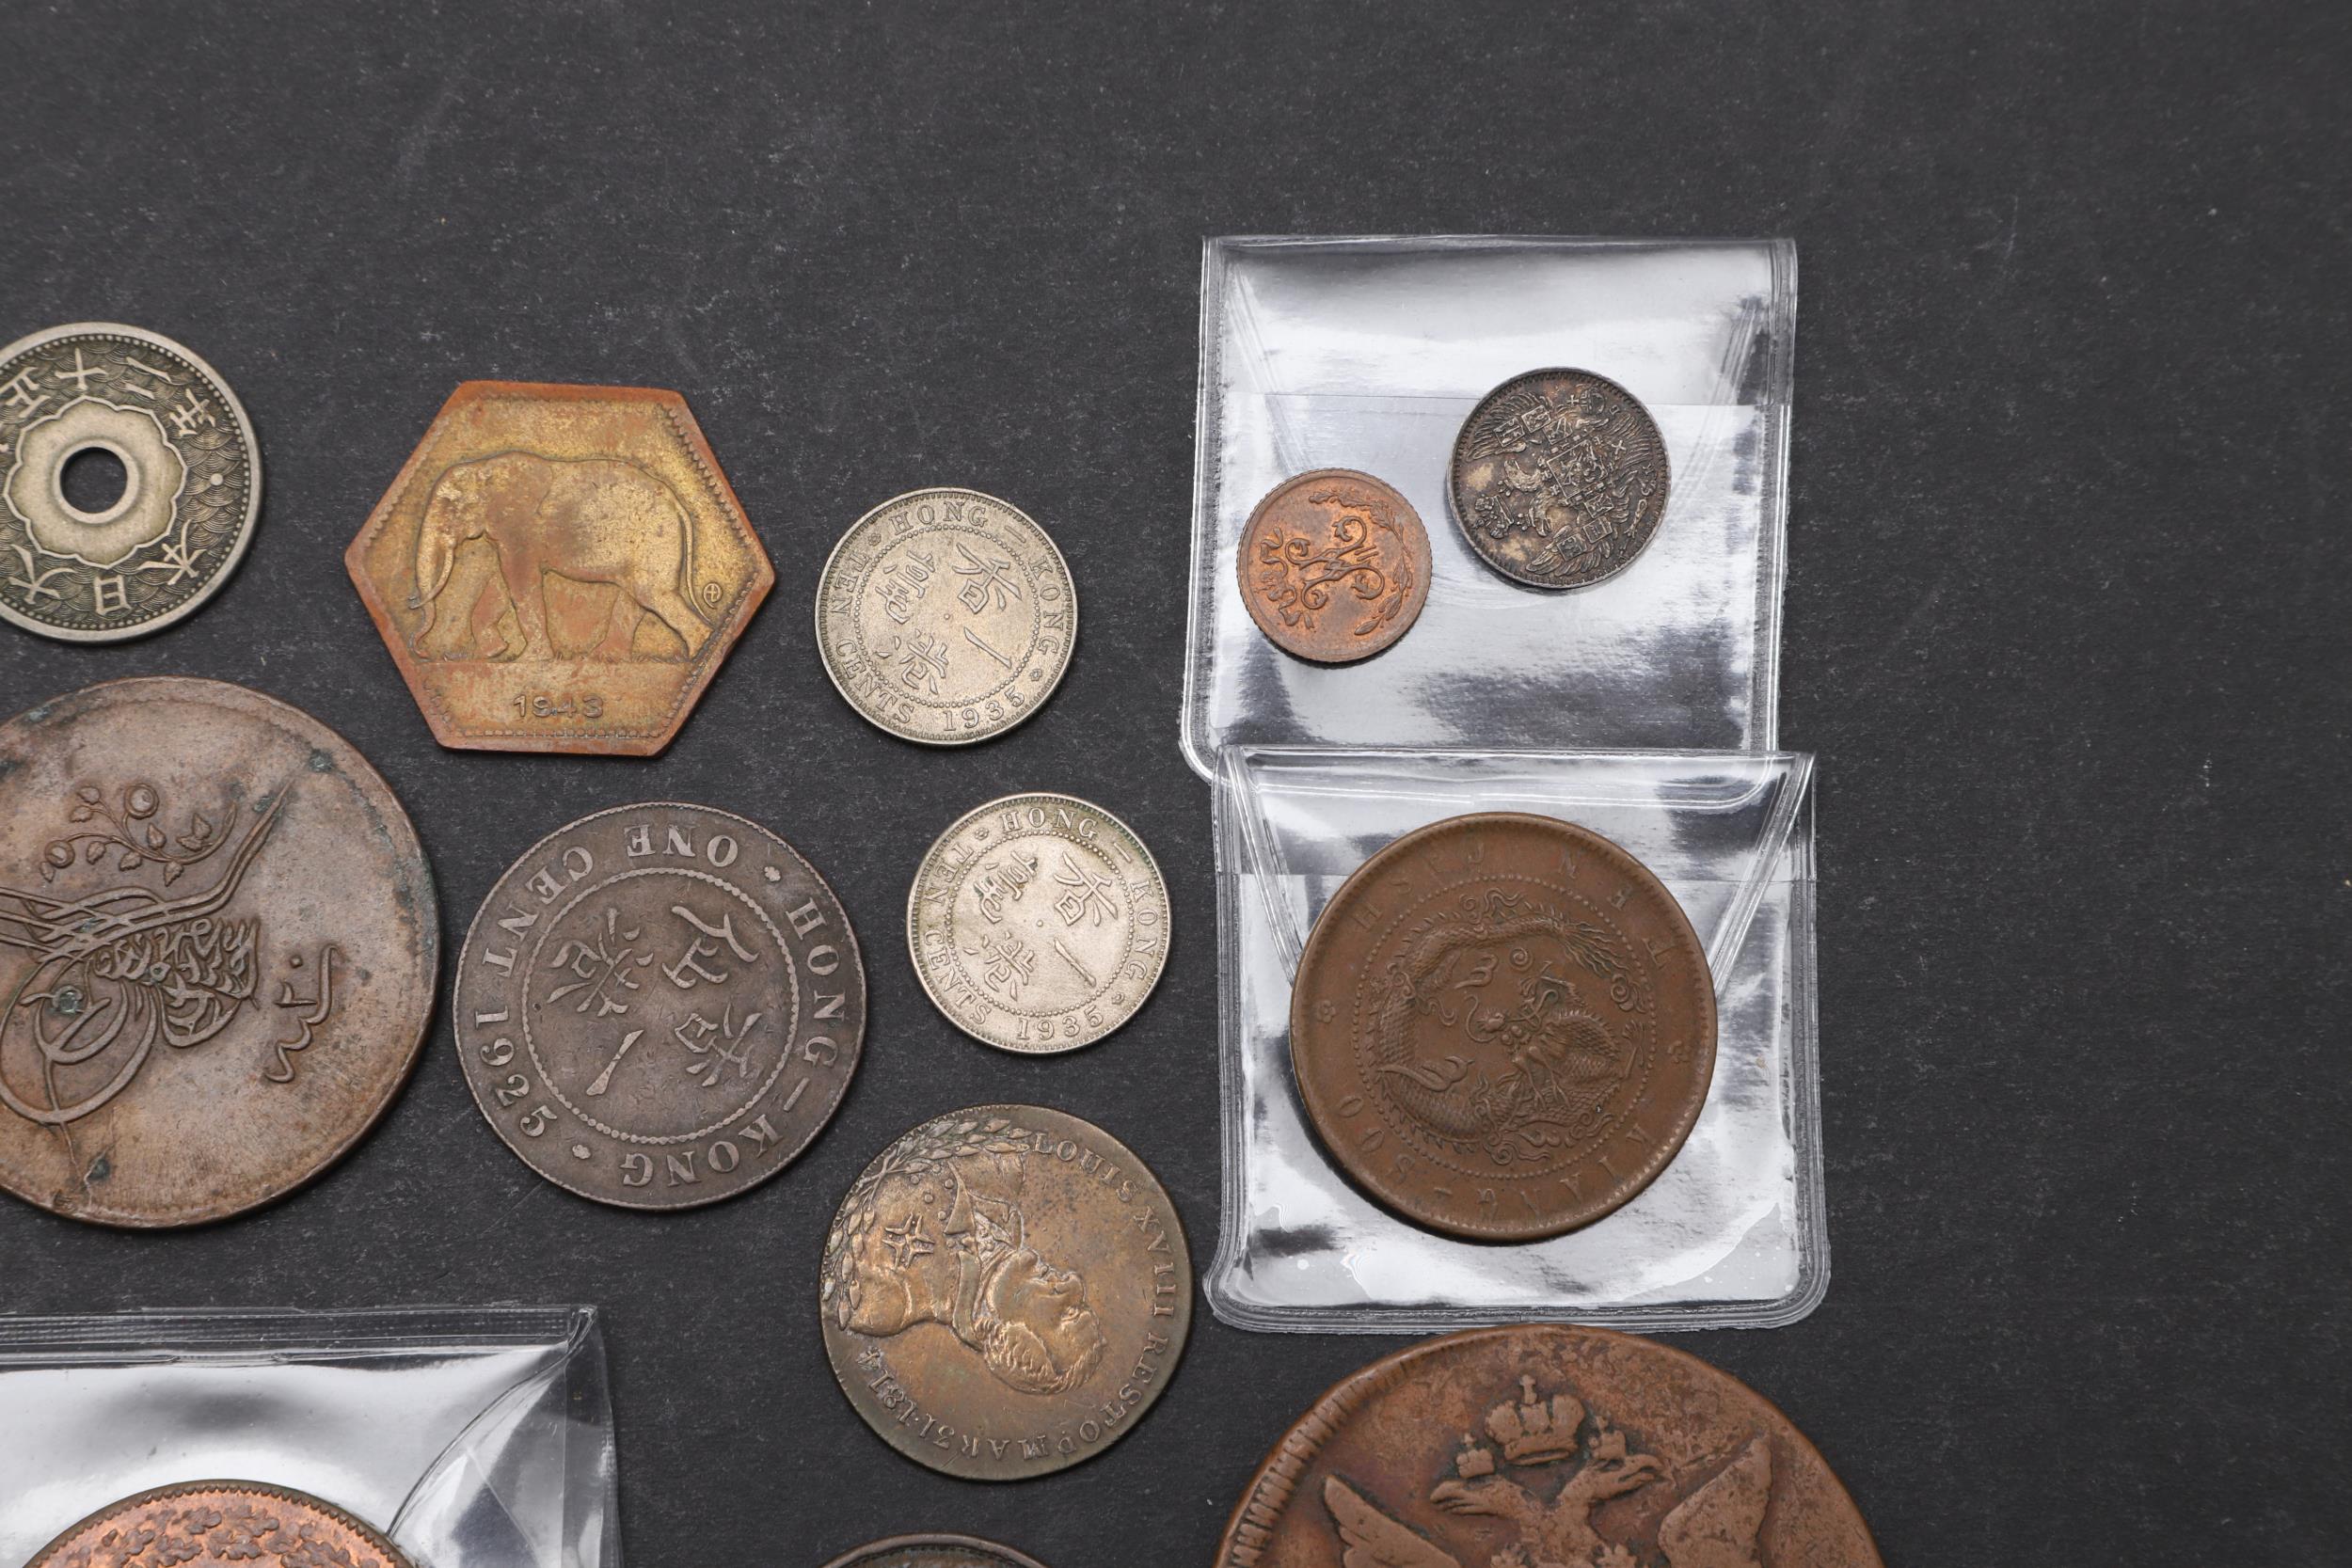 A SMALL COLLECTION OF RUSSIAN COINS. - Image 3 of 7